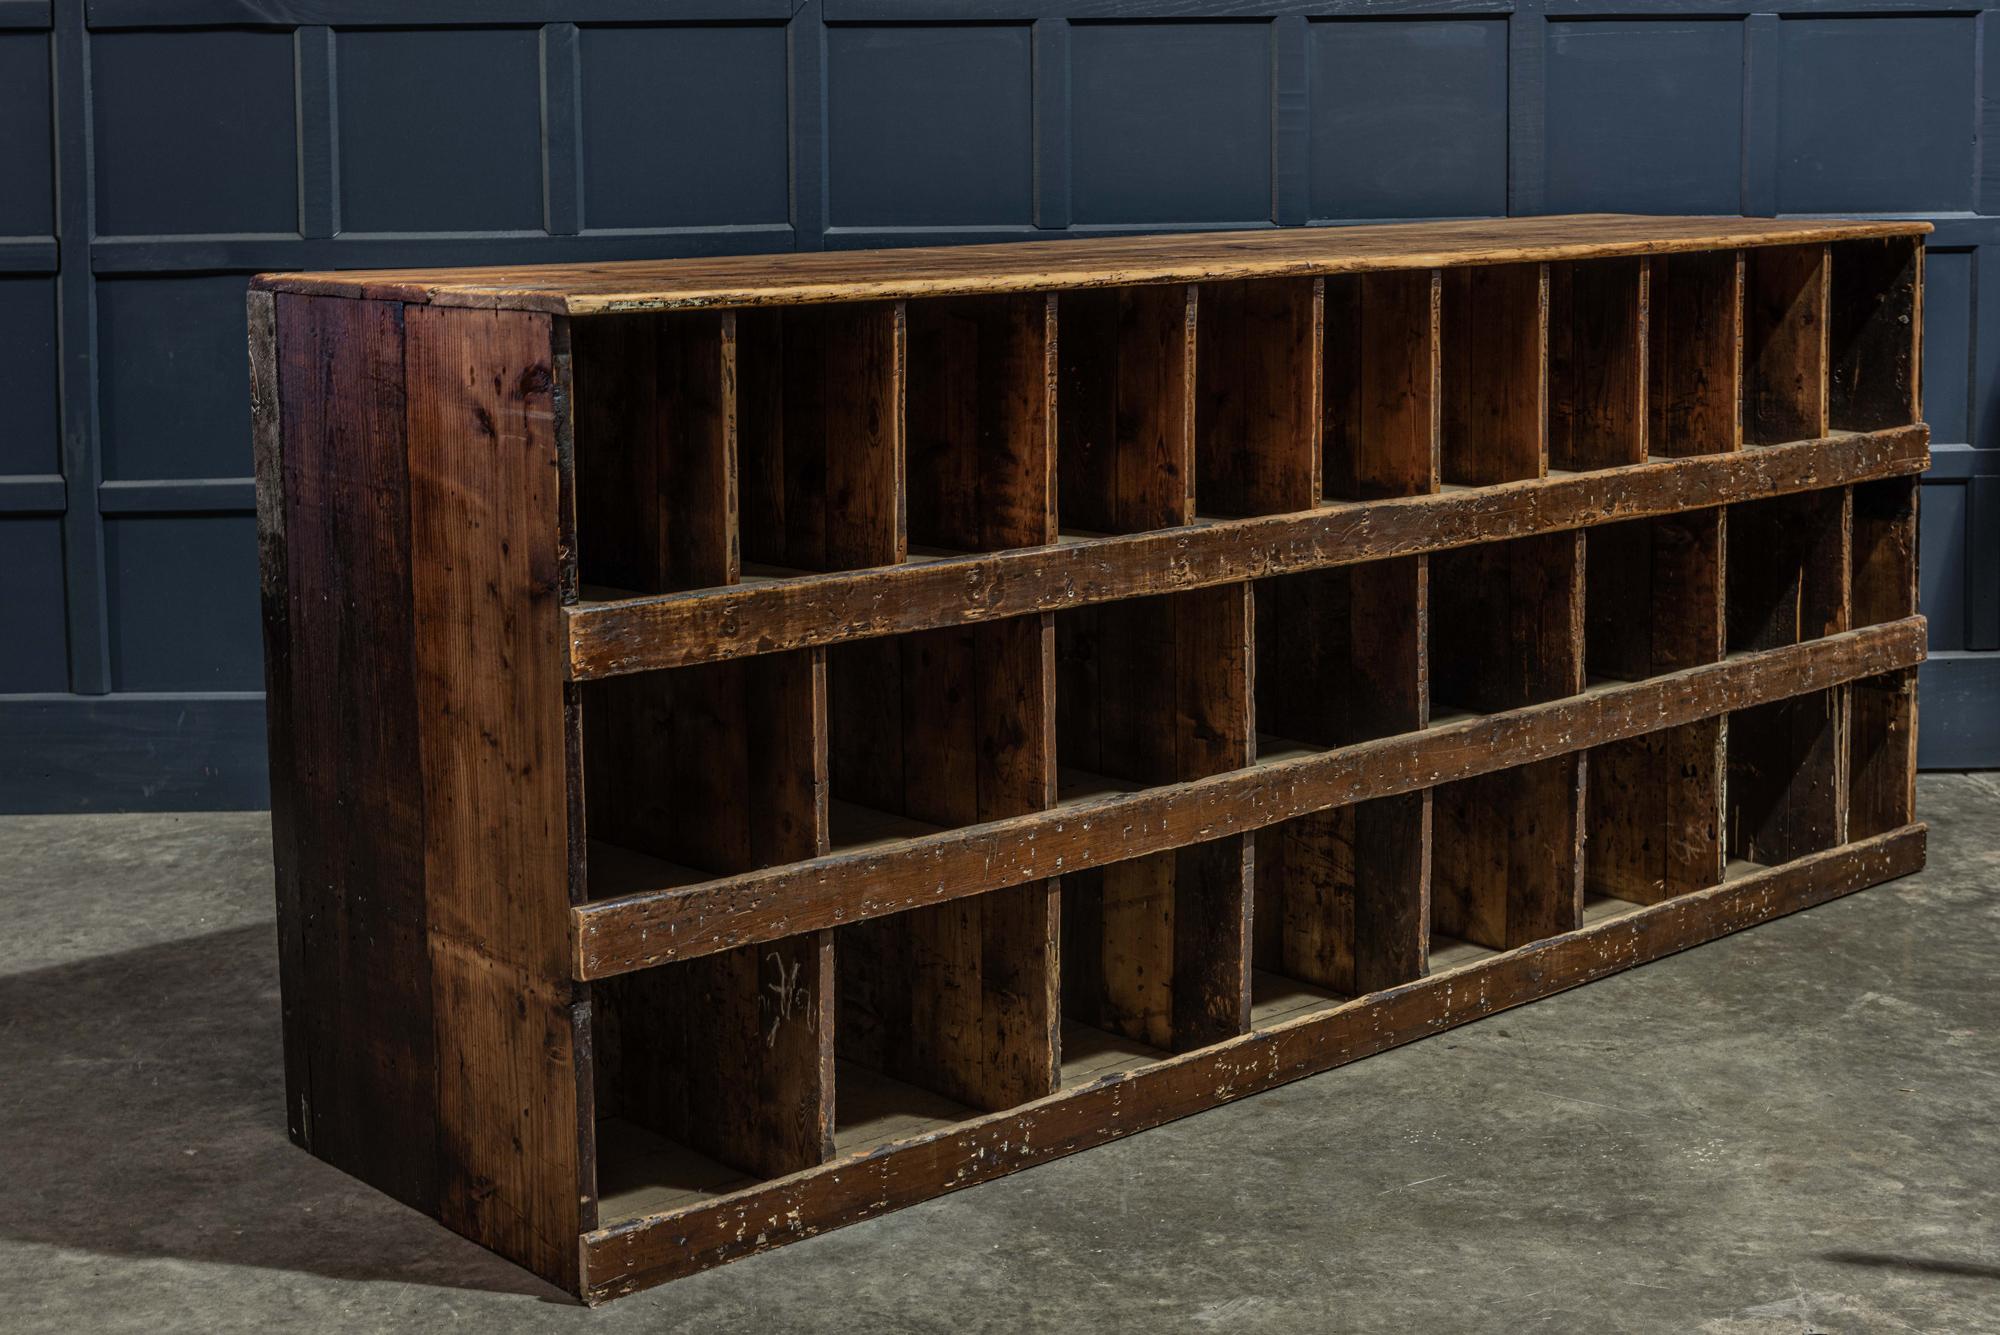 Pair of English 19th century pigeonhole counter cabinets
circa 1849.

Pair of 19th century pine pigeonhole counter cabinets in original unrestored condition.
From 'Whites Ironmongers' Birmingham, on the open market for the first time in its